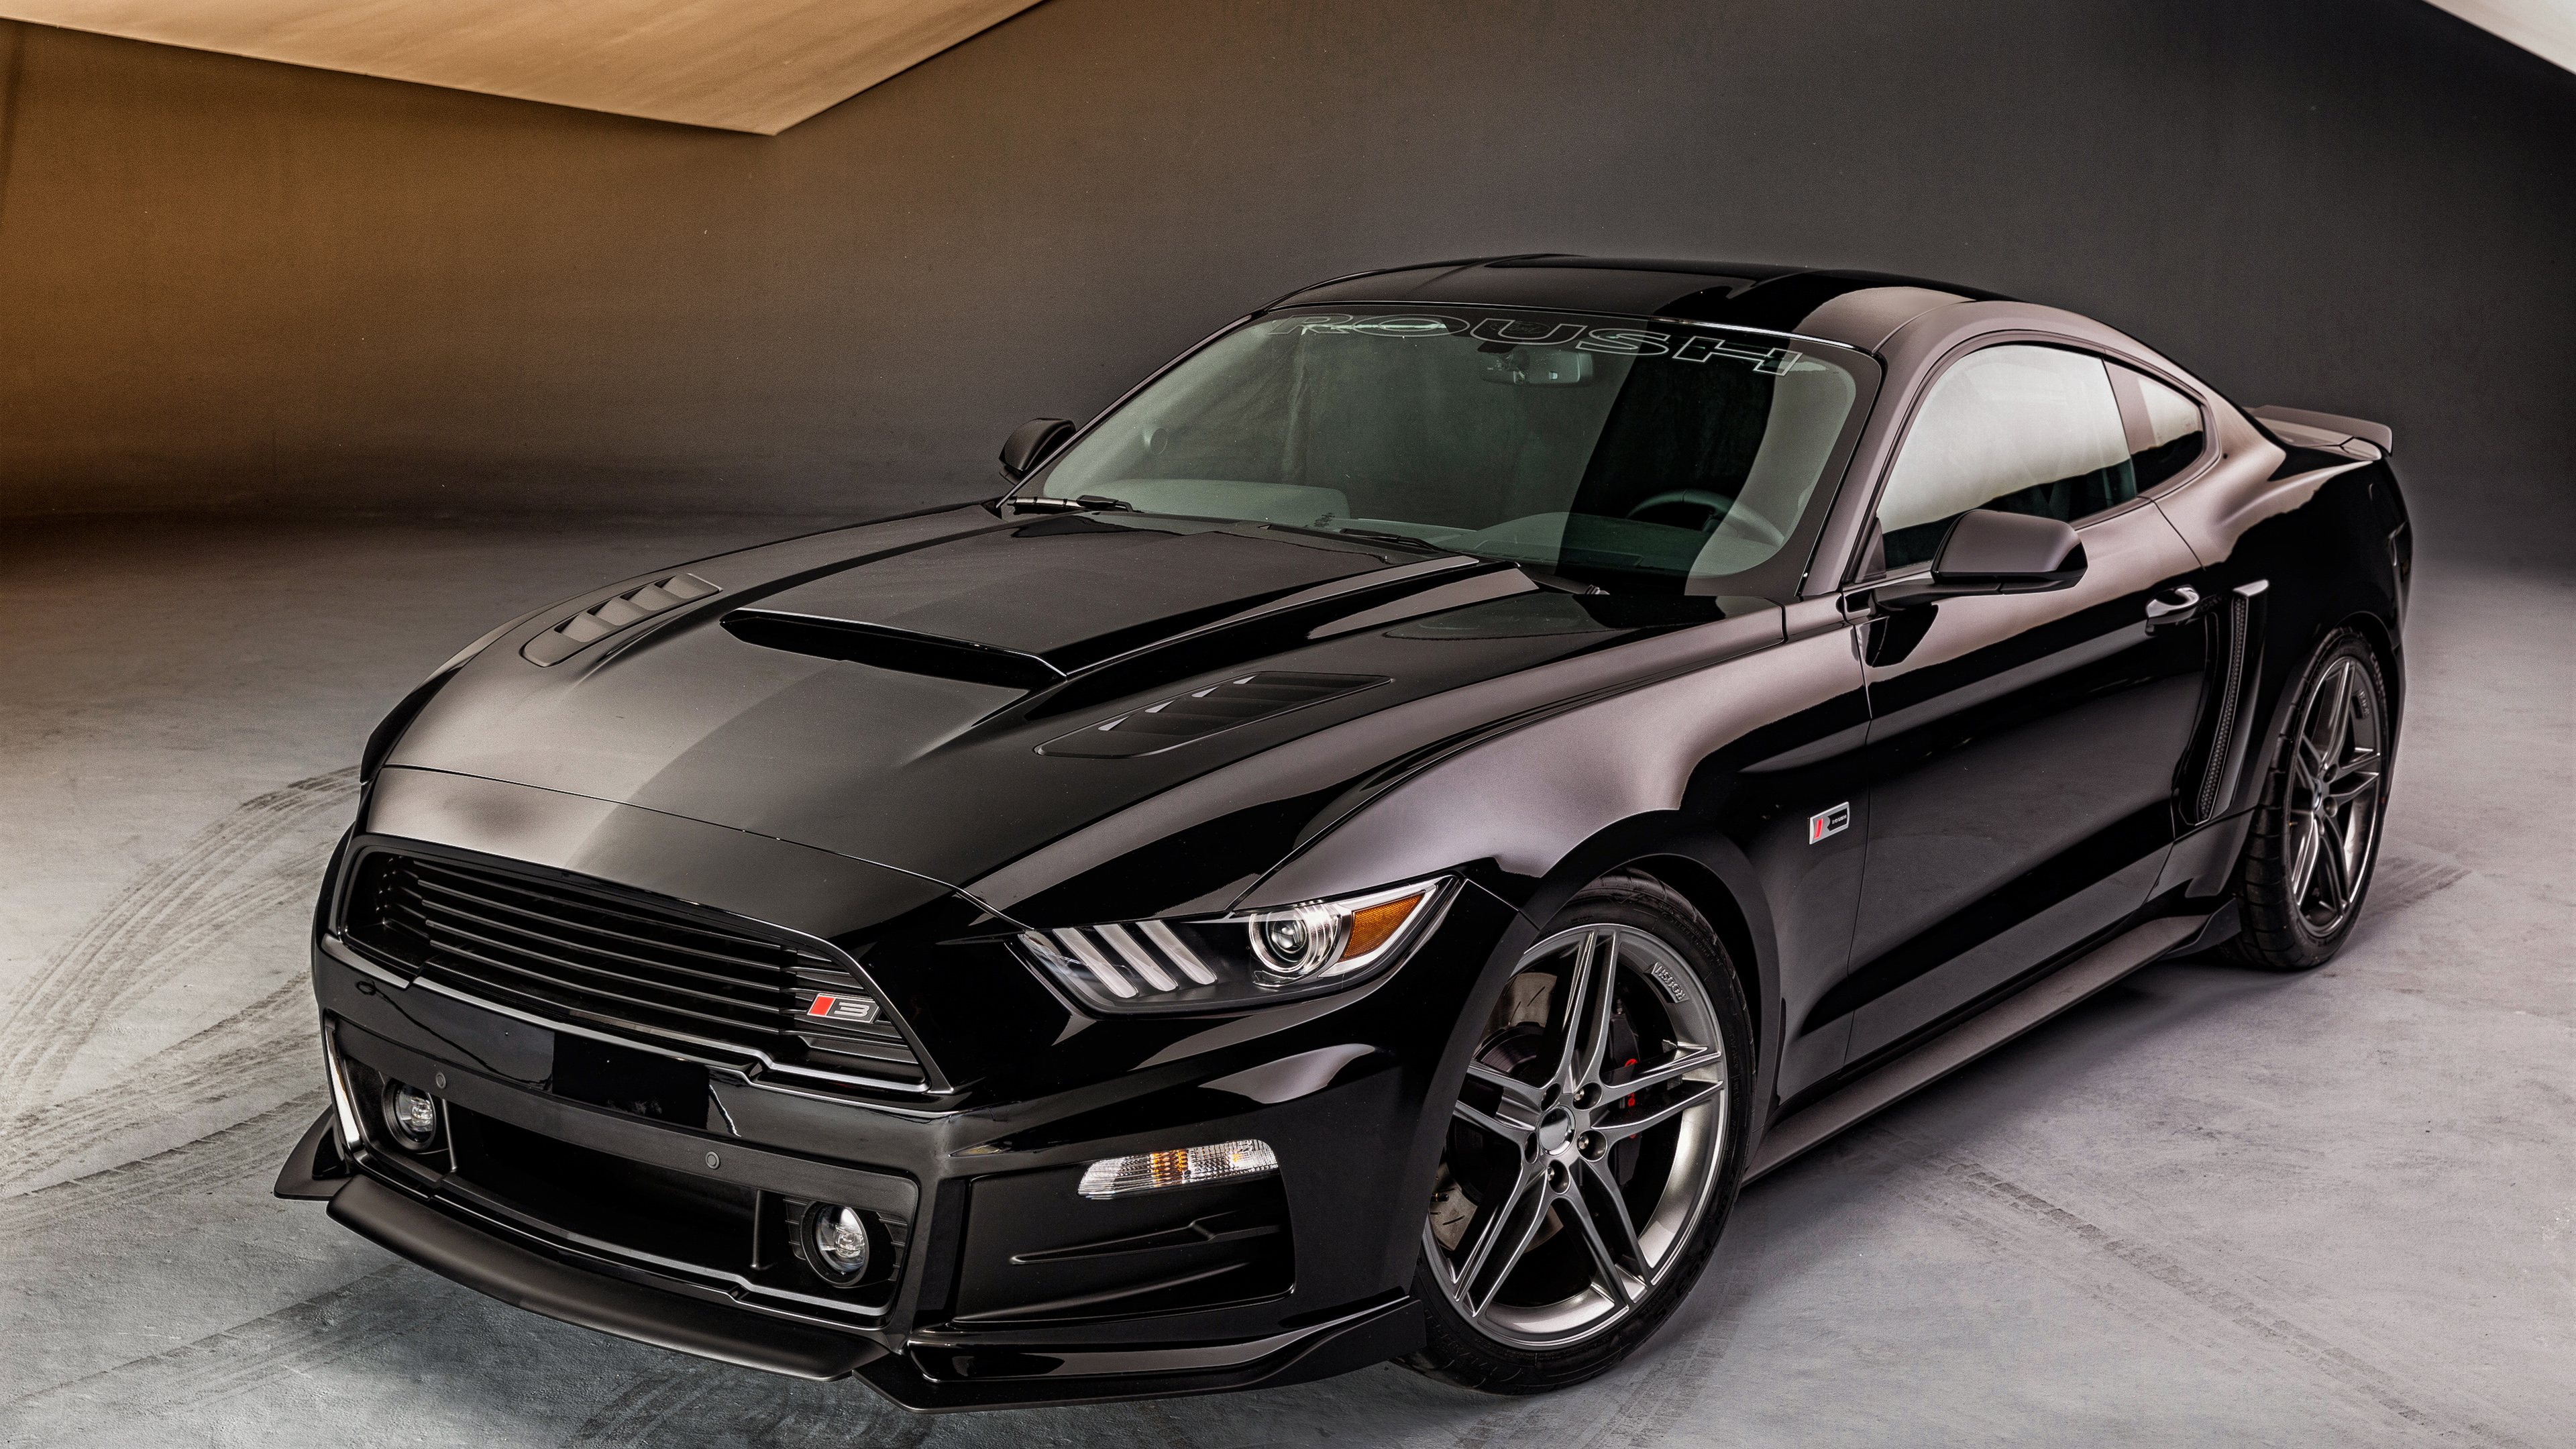 Roush Ford Mustang Rsrelated Car Wallpaper Cars